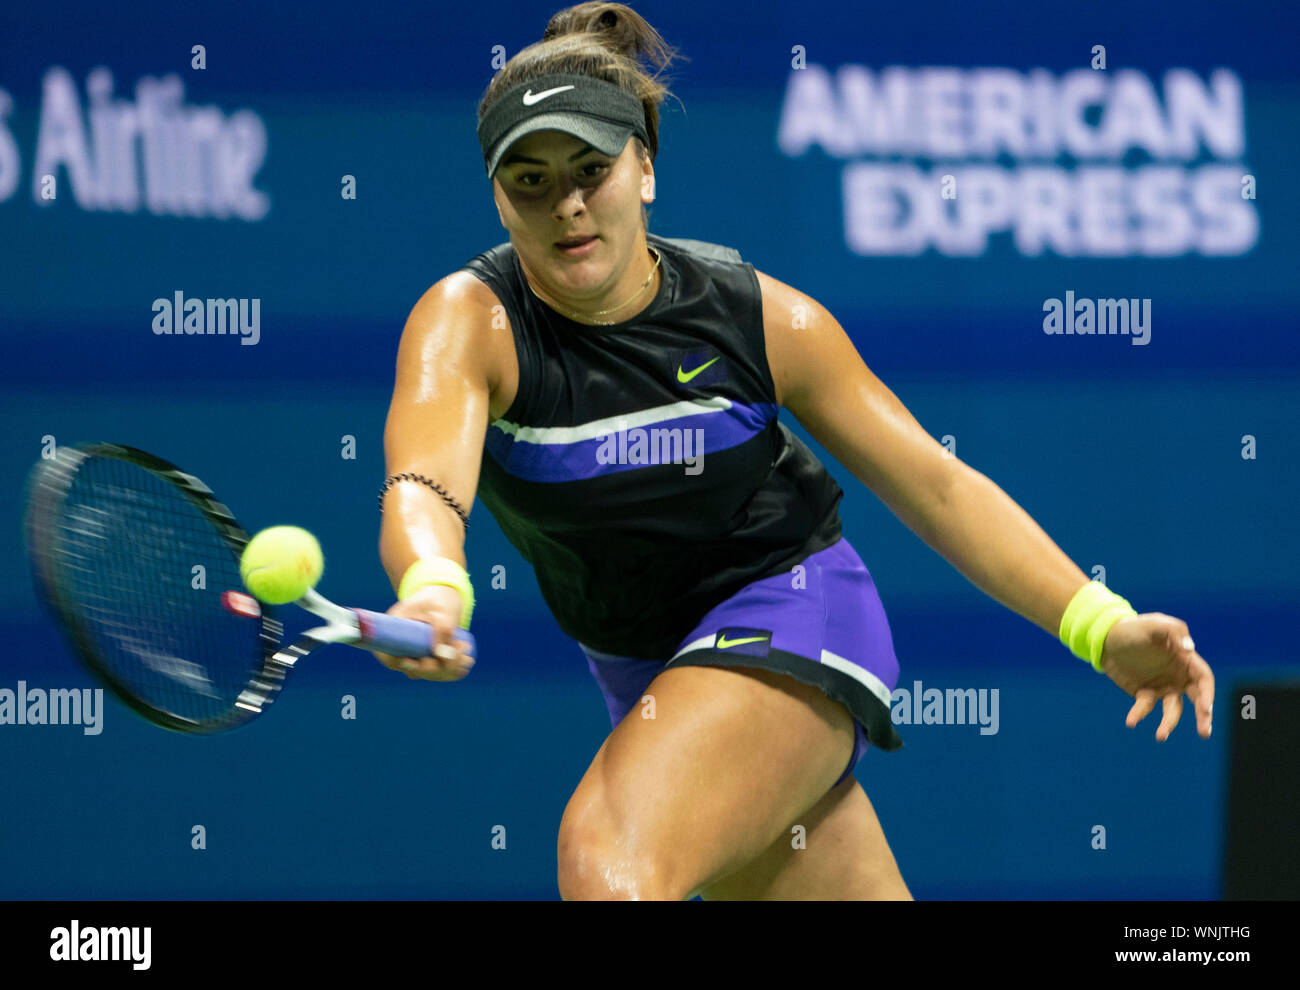 Flushing, Queens, NY, USA. 5th Sep, 2019. Bianca Andreescu (CAN) defeated  Belinda Bencic (SUI) 7-6, 7-5, at the US Open being played at Billie Jean  King National Tennis Center in Flushing, Queens,